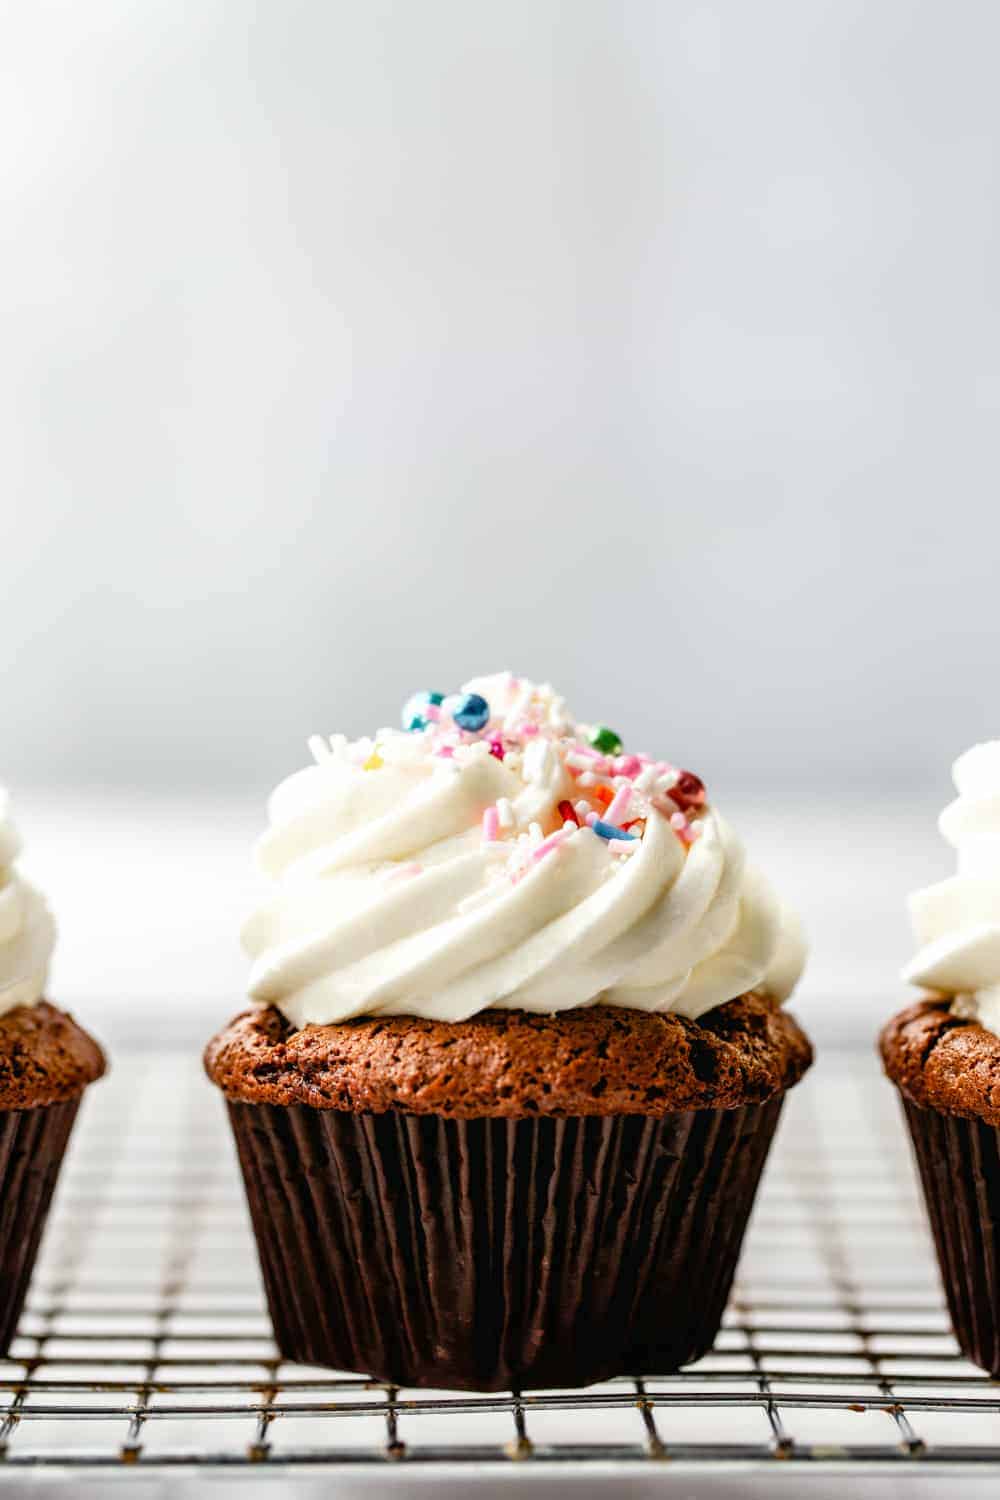 Customize Homemade Buttercream Frosting with just about any flavor you can think of!